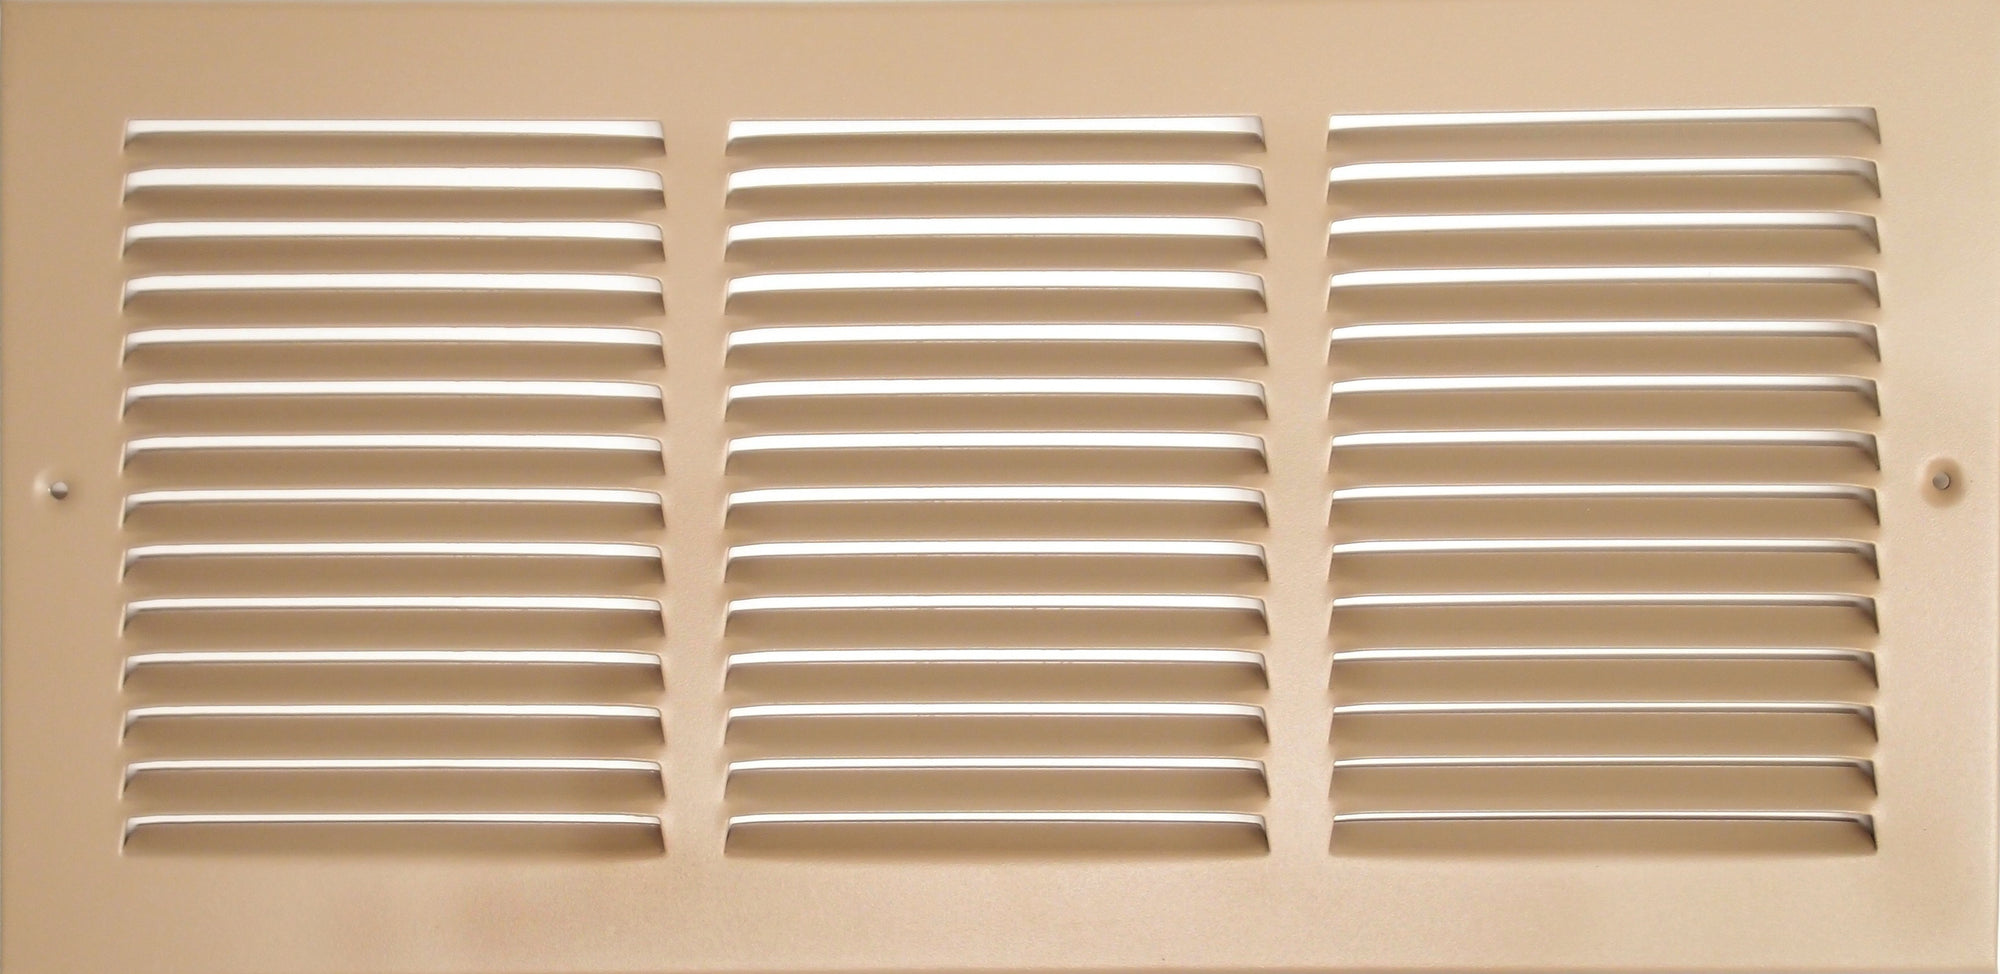 24" X 4" Air Vent Return Grilles - Sidewall and Ceiling - Steel